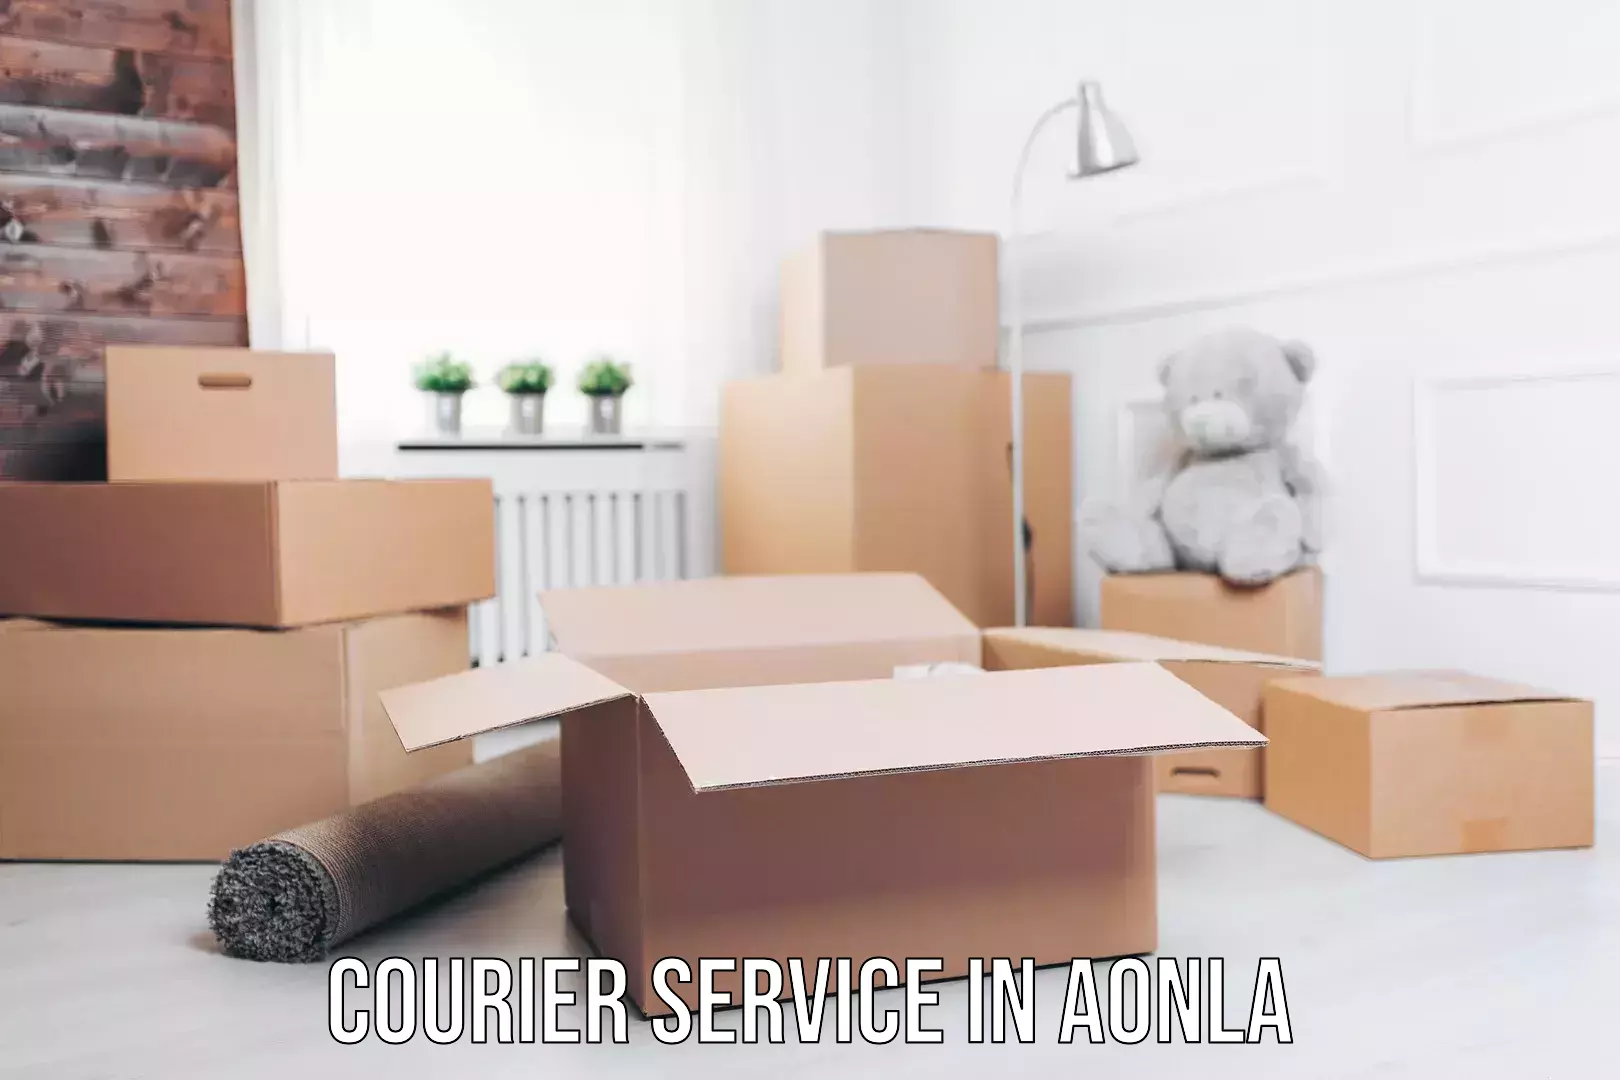 Reliable courier services in Aonla